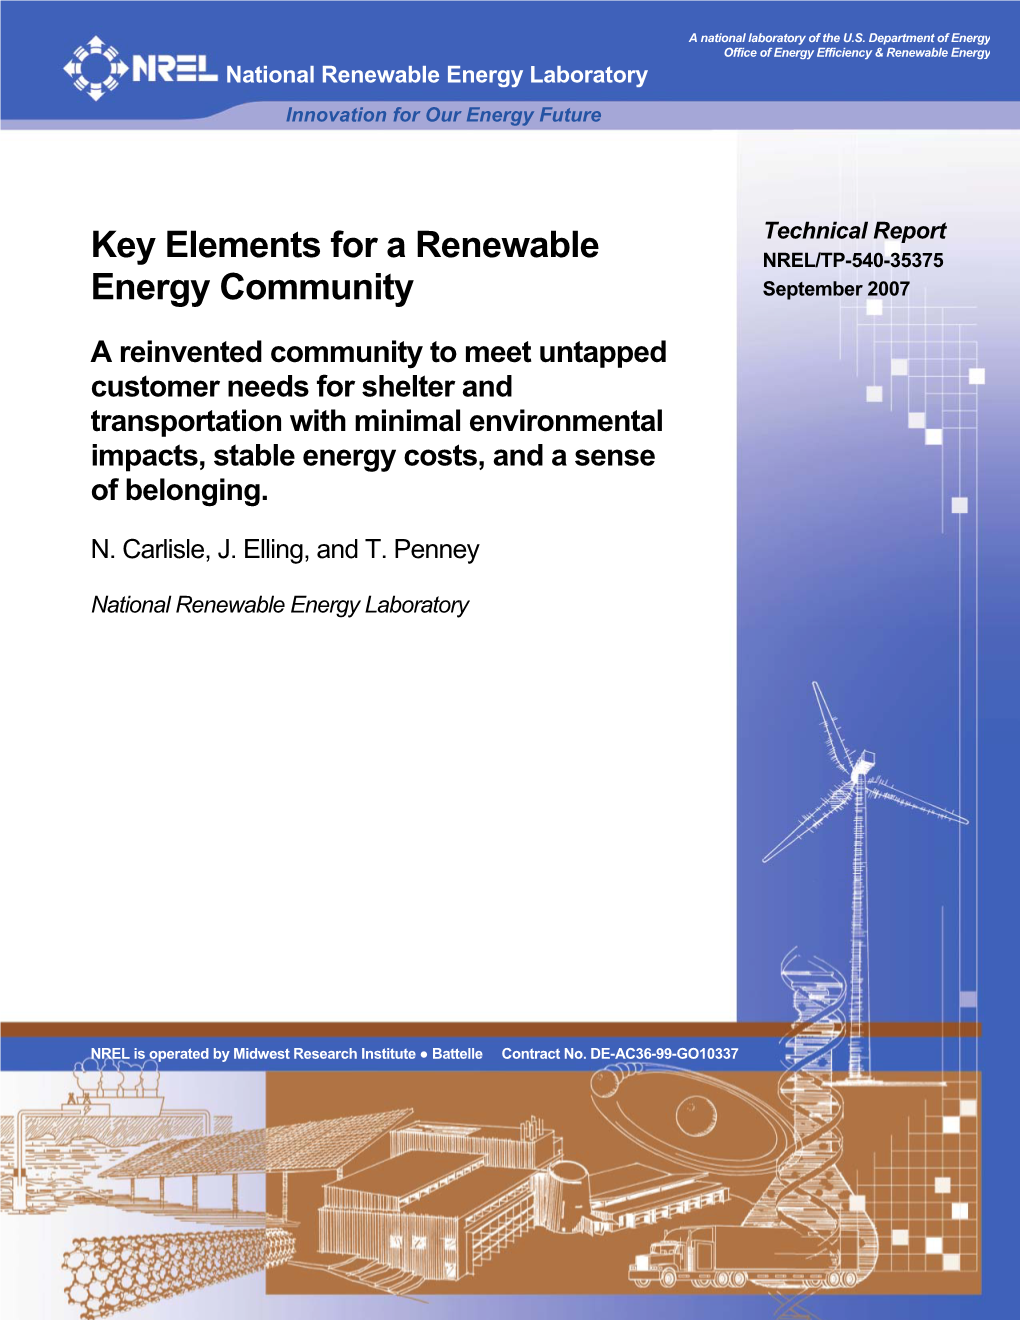 Steps to a Renewable Energy Community